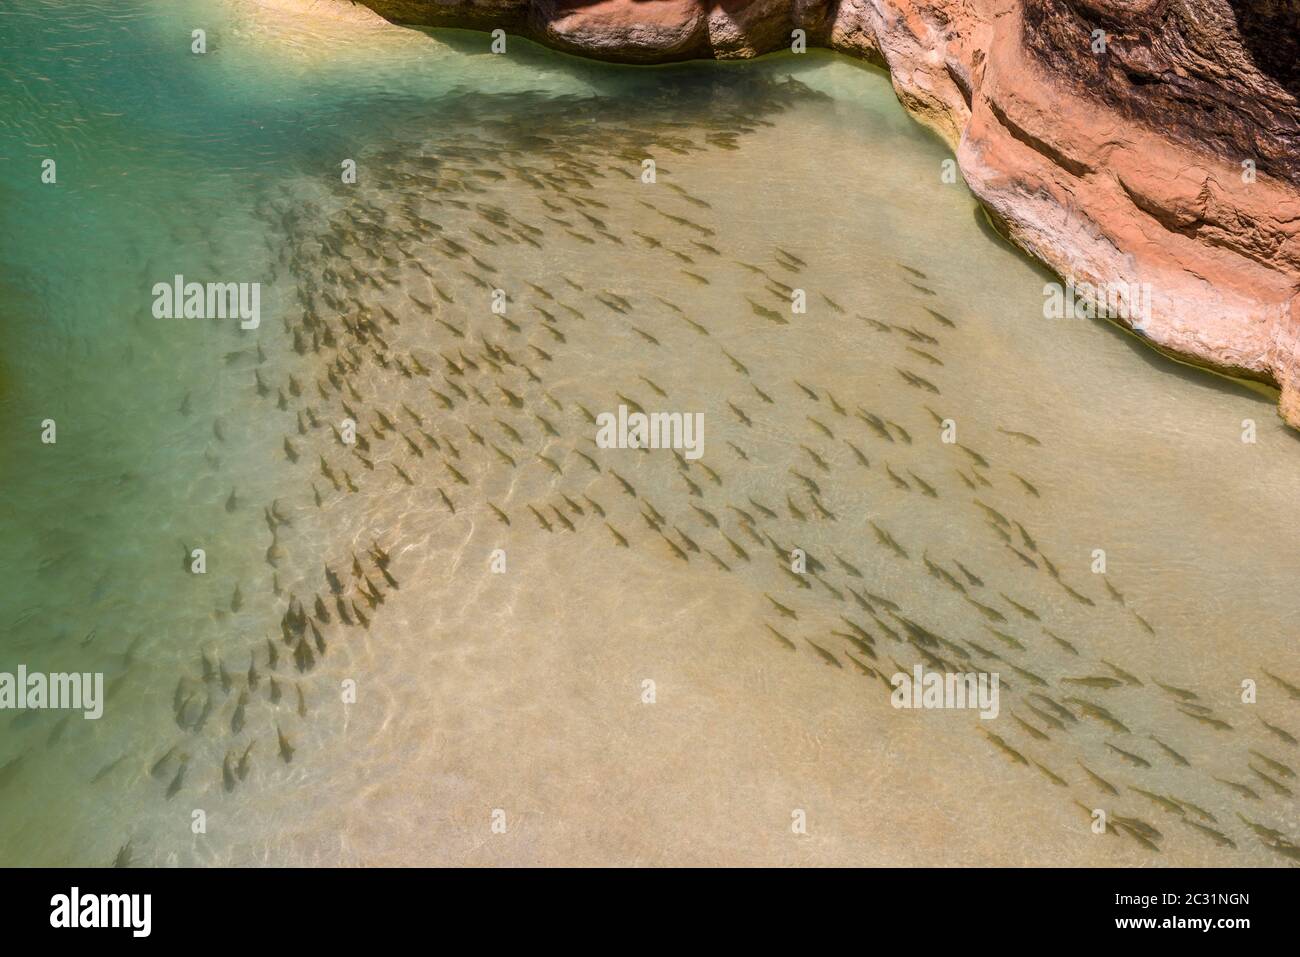 A school of suckers (Castomus spp) spawning at the mouth of Havasu Creek, Grand Canyon National Park, Arizona, USA Stock Photo